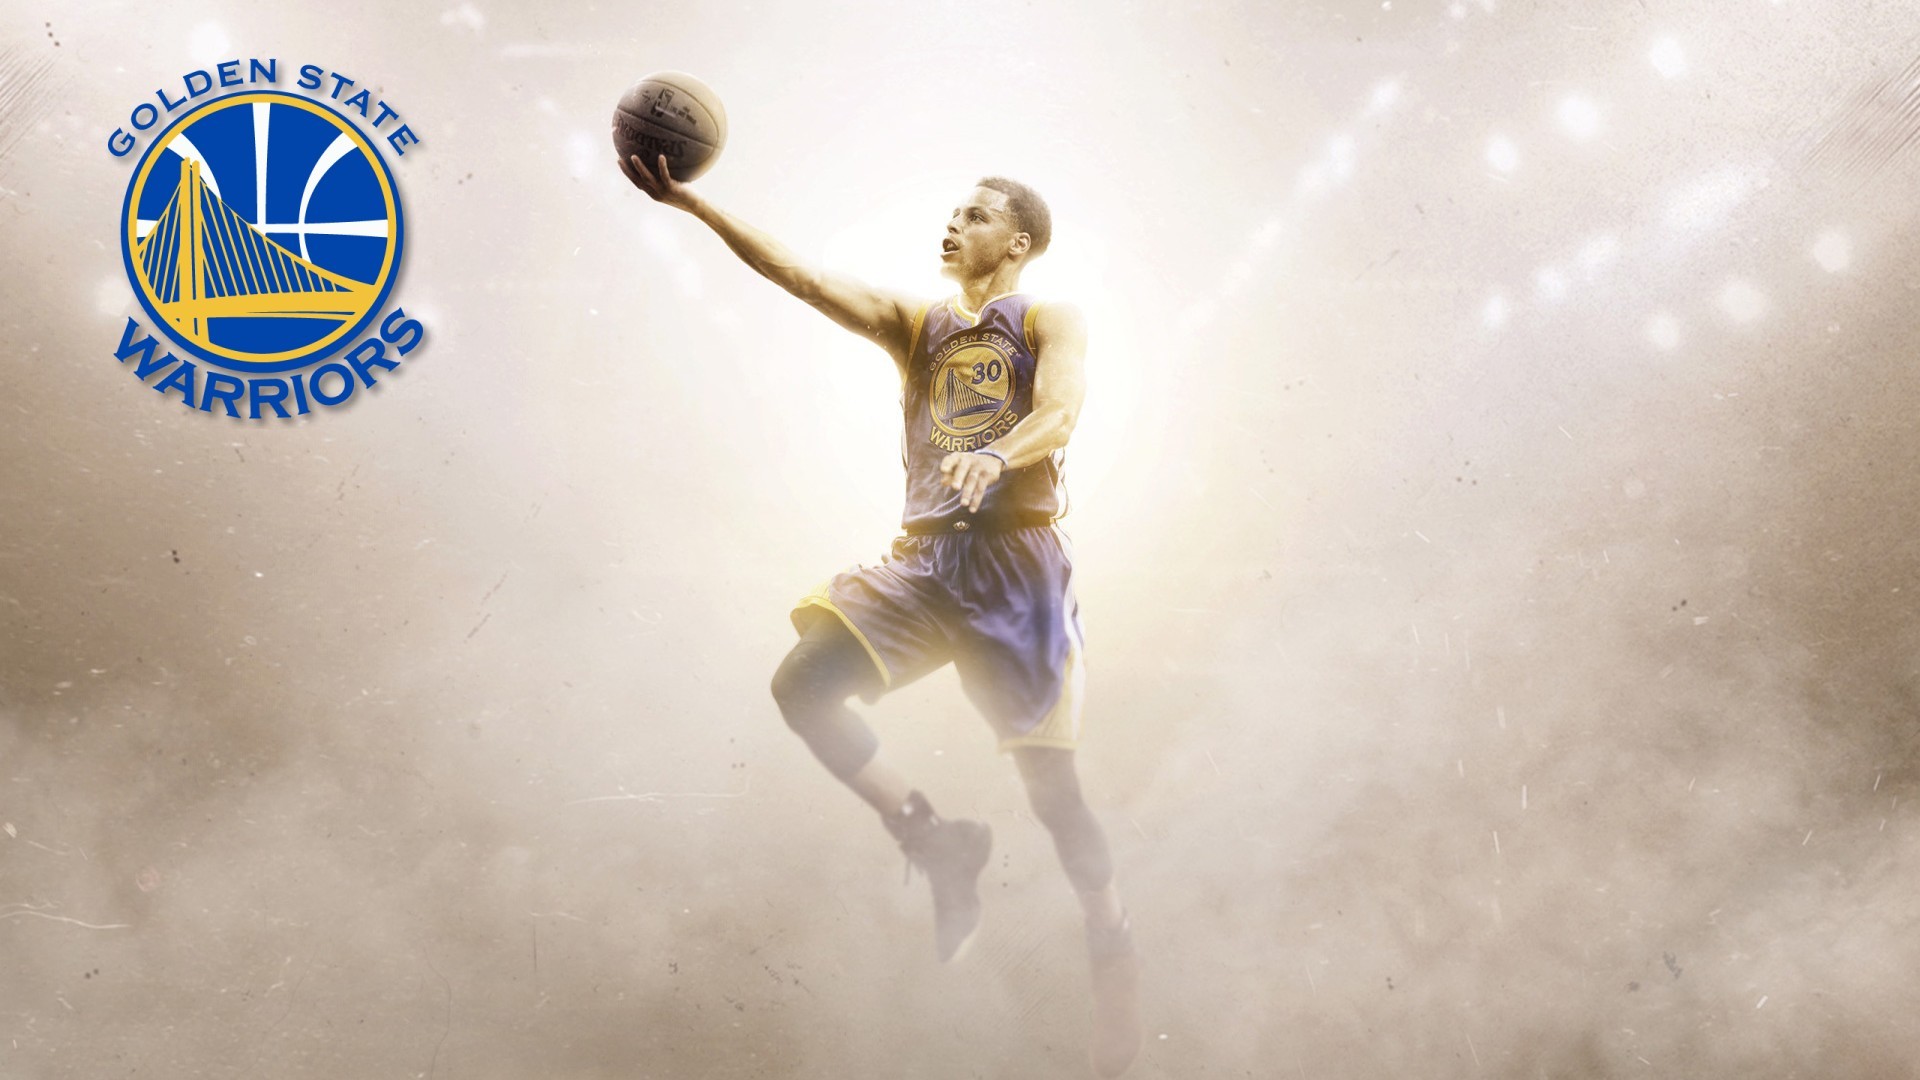 1920x1080 Stephen Curry Mac Backgrounds with image dimensions  pixel. You  can make this wallpaper for